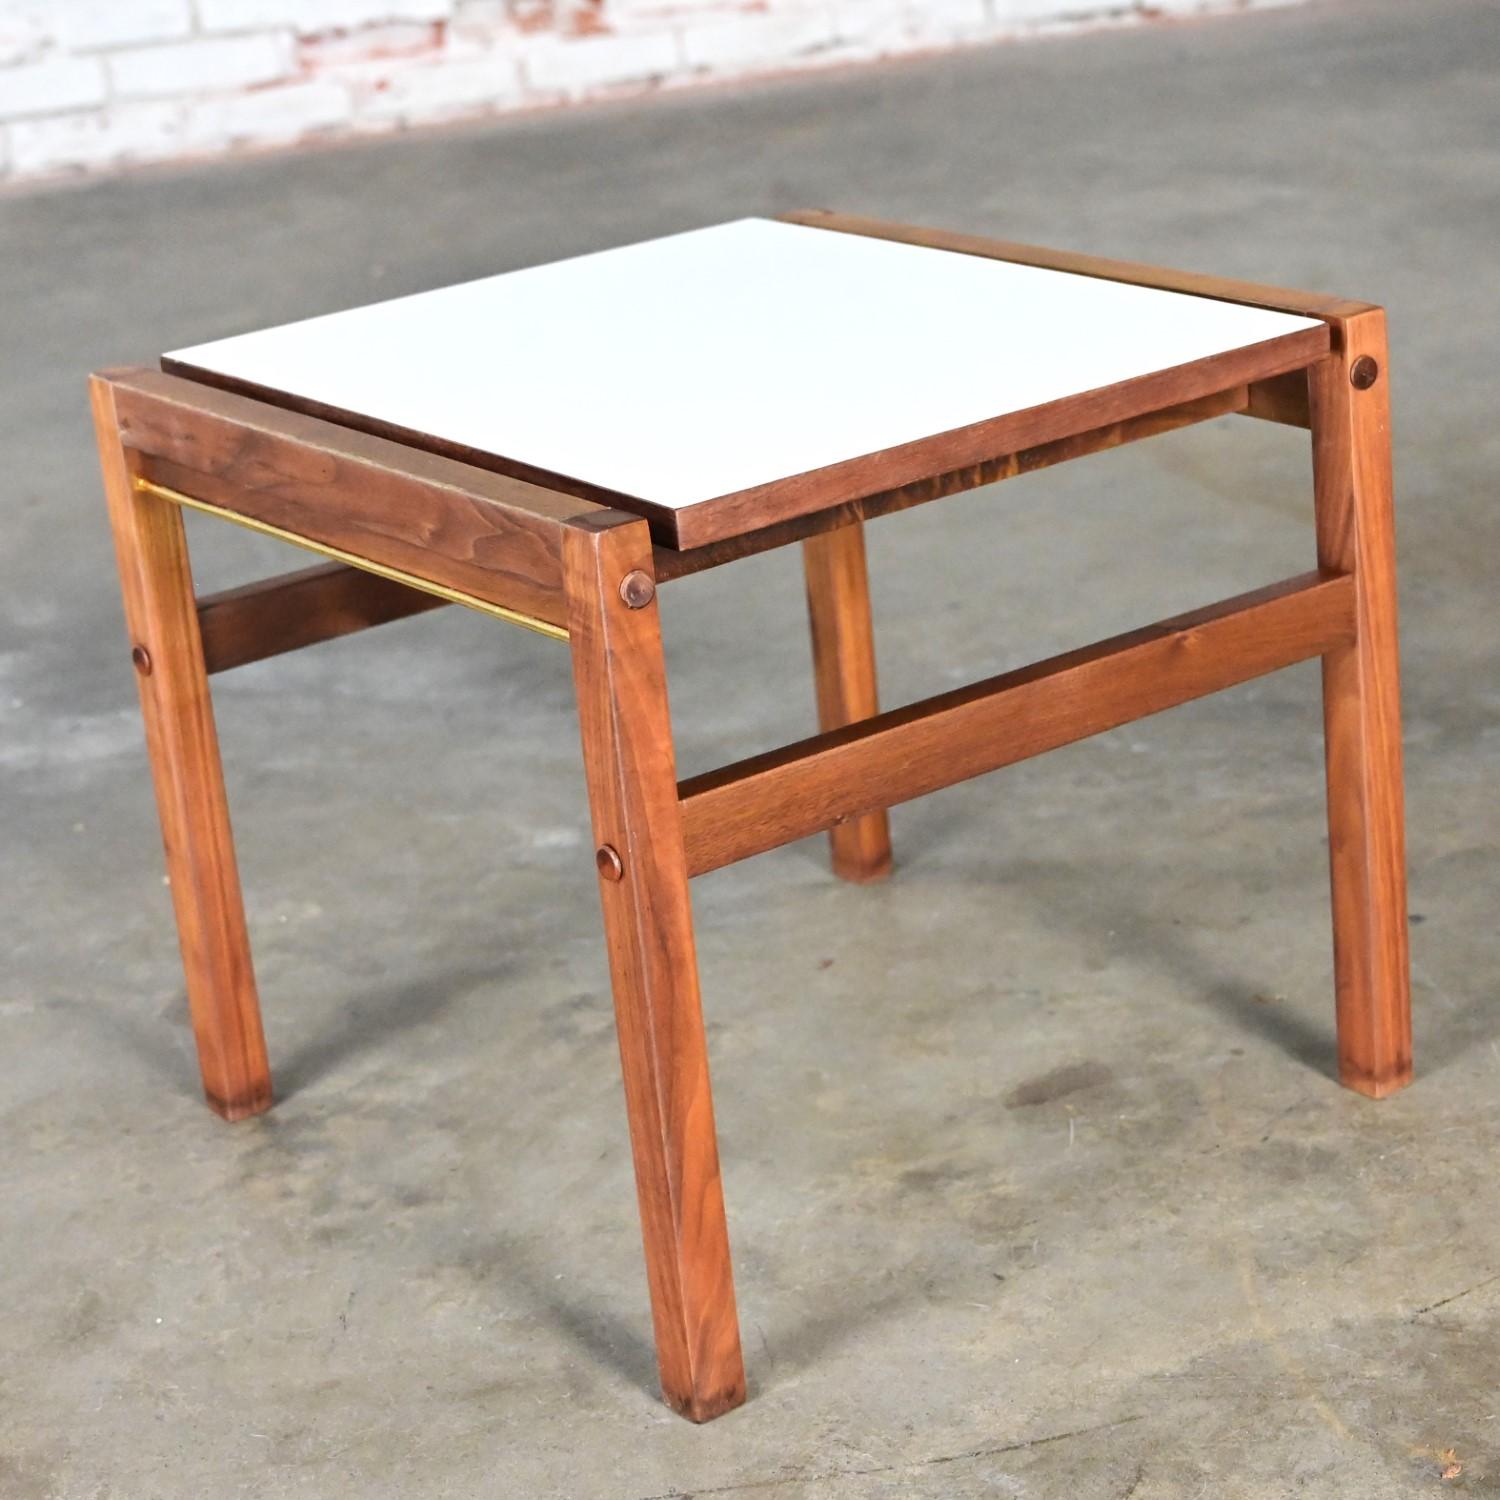 Lovely Mid-20th Century Mid Century Modern small square side table comprised of a teak frame and a white laminate top. Beautiful condition, keeping in mind that this is vintage and not new so will have signs of use and wear even if it has been